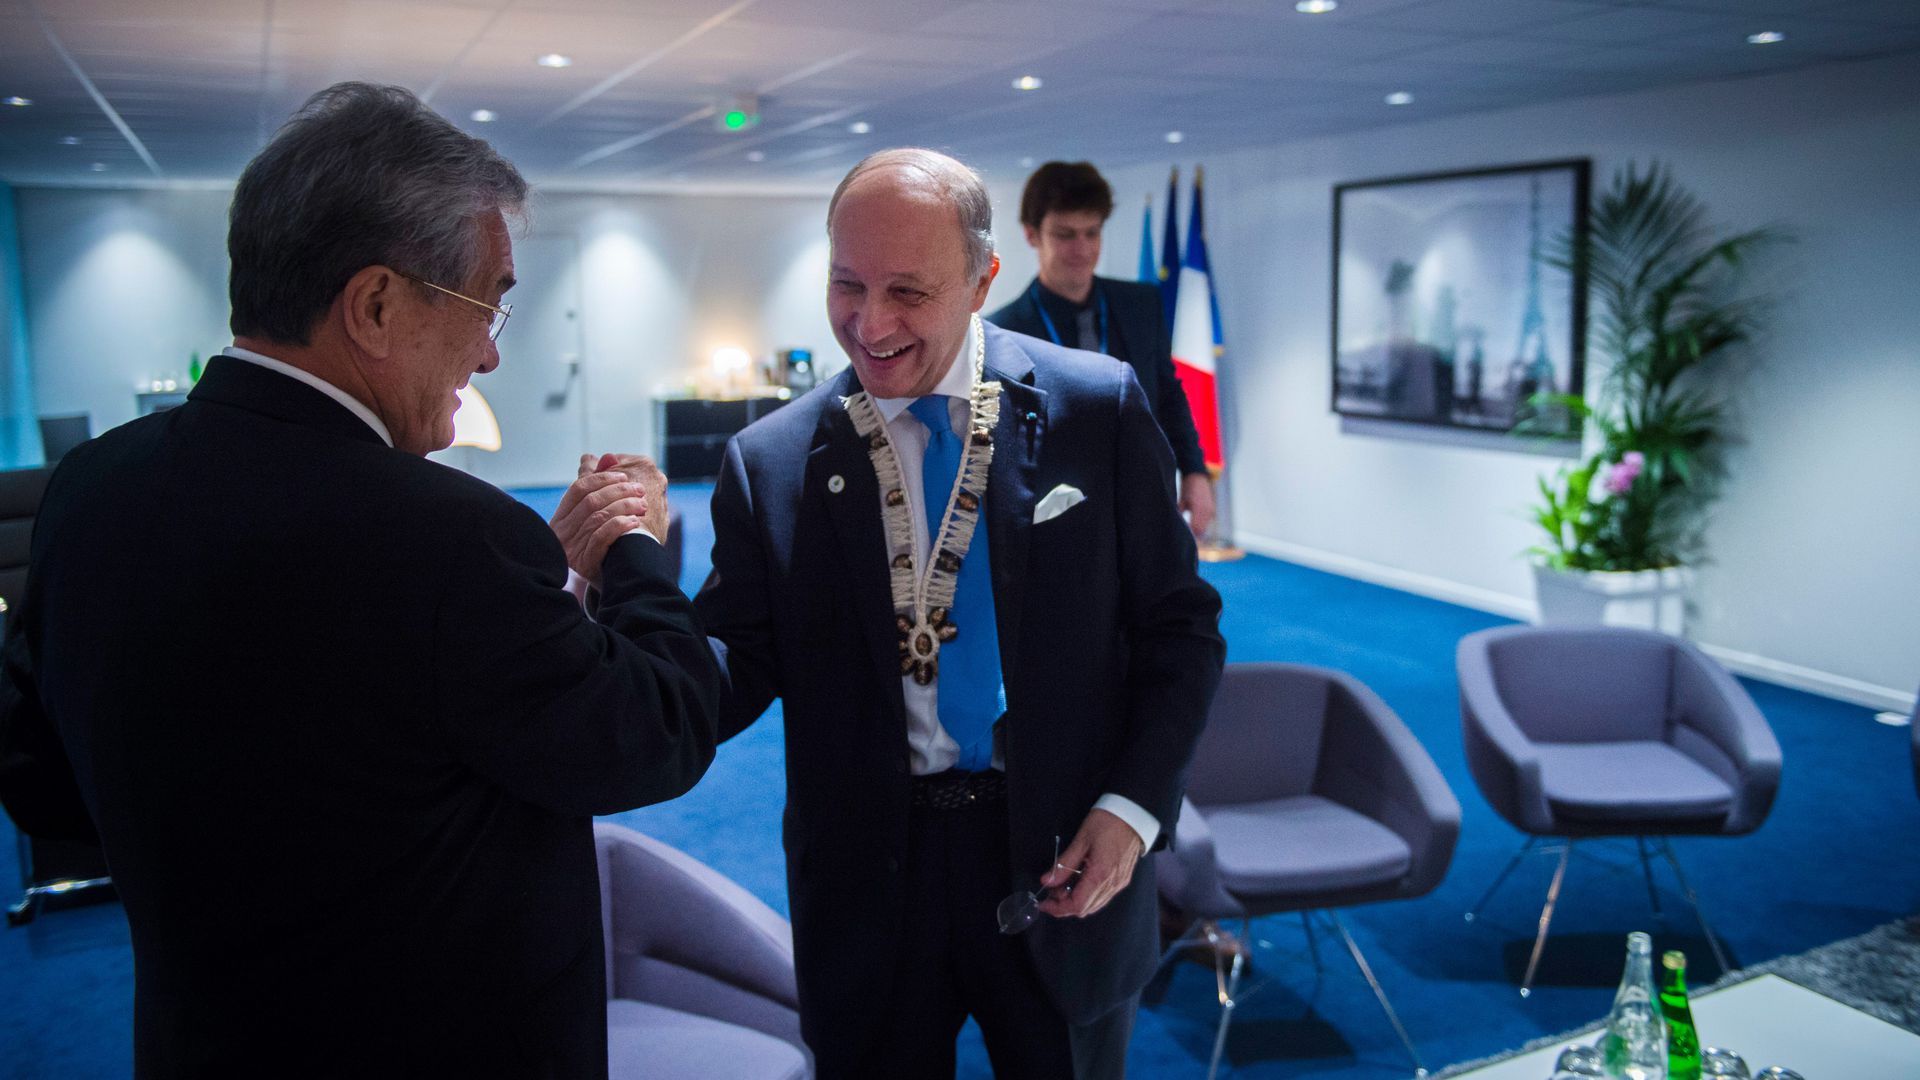 Picture taken in 2015 showing then-French Foreign Affairs minister Laurent Fabius and then-Marshall Islands' Foreign Affairs minister Tony de Brum greeting by shaking hands and smiling